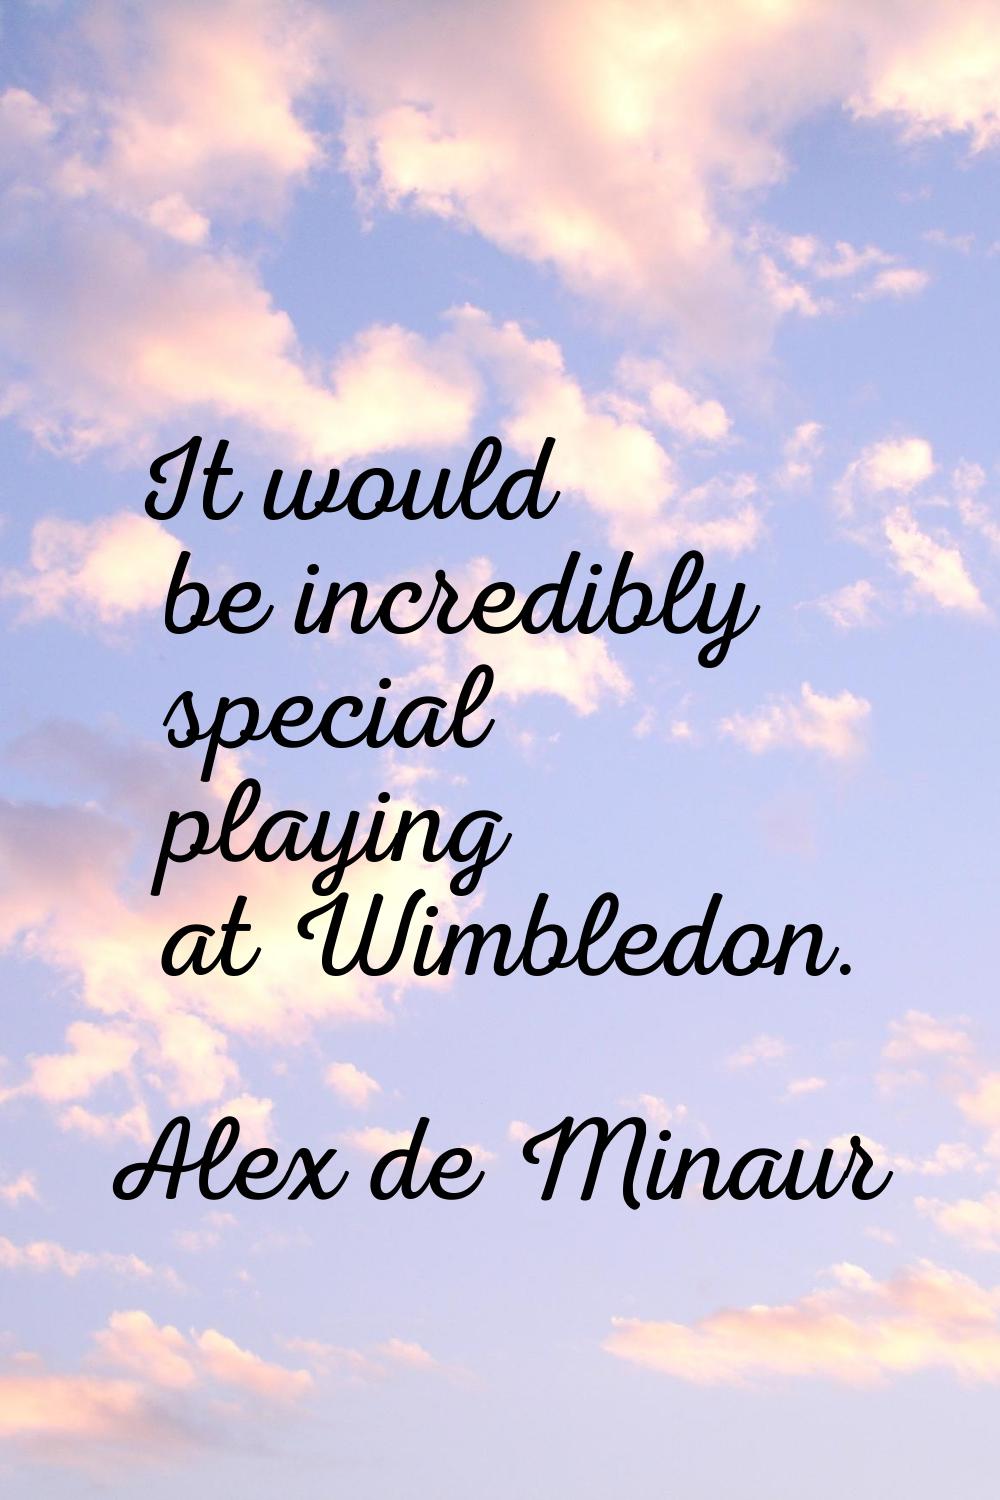 It would be incredibly special playing at Wimbledon.